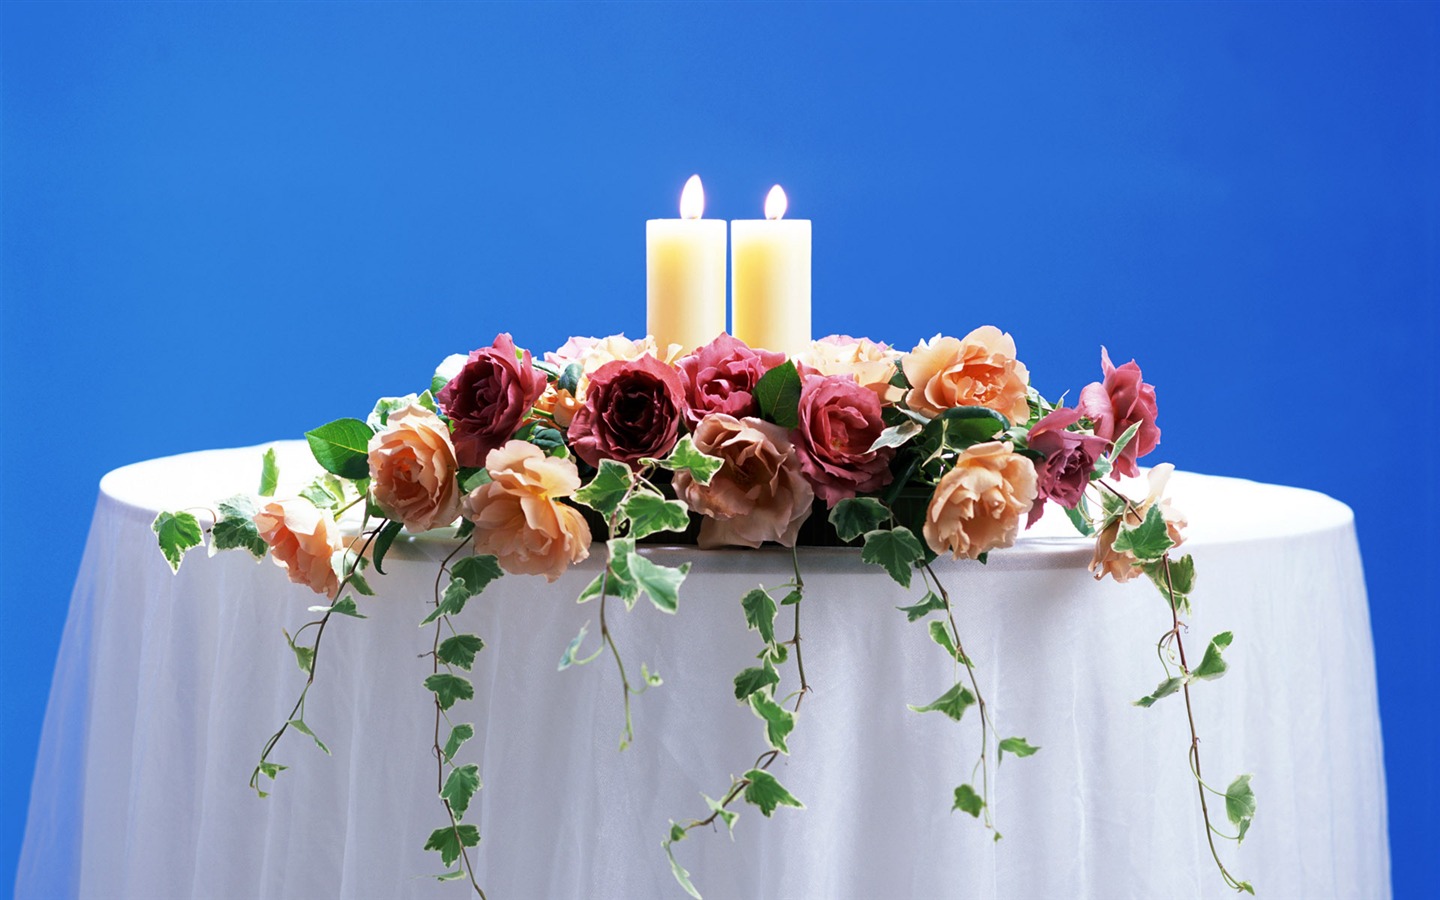 Weddings and Flowers wallpaper (2) #13 - 1440x900